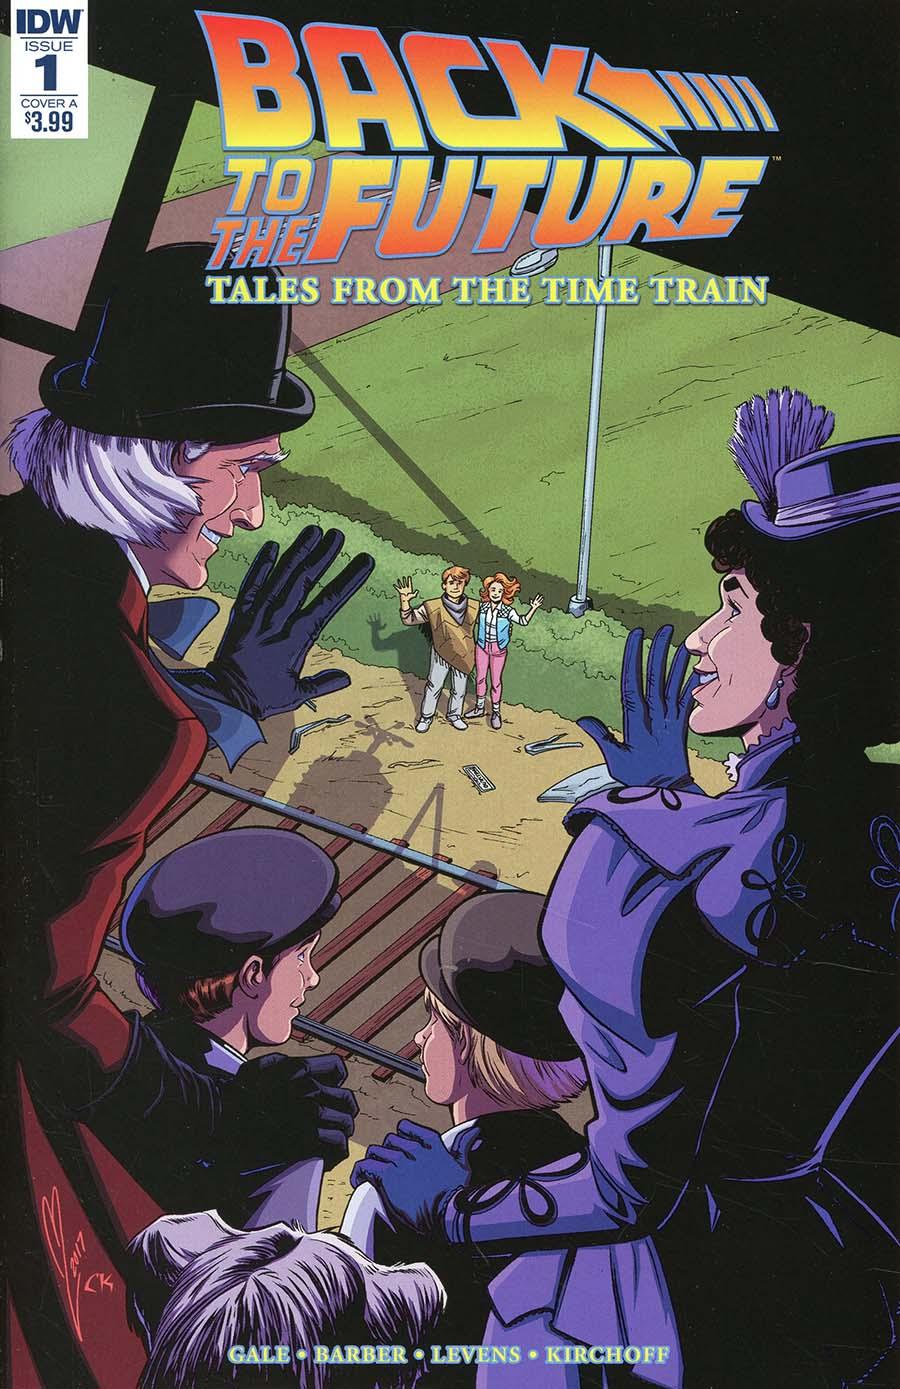 Back To The Future Tales From The Time Train Vol. 1 #1